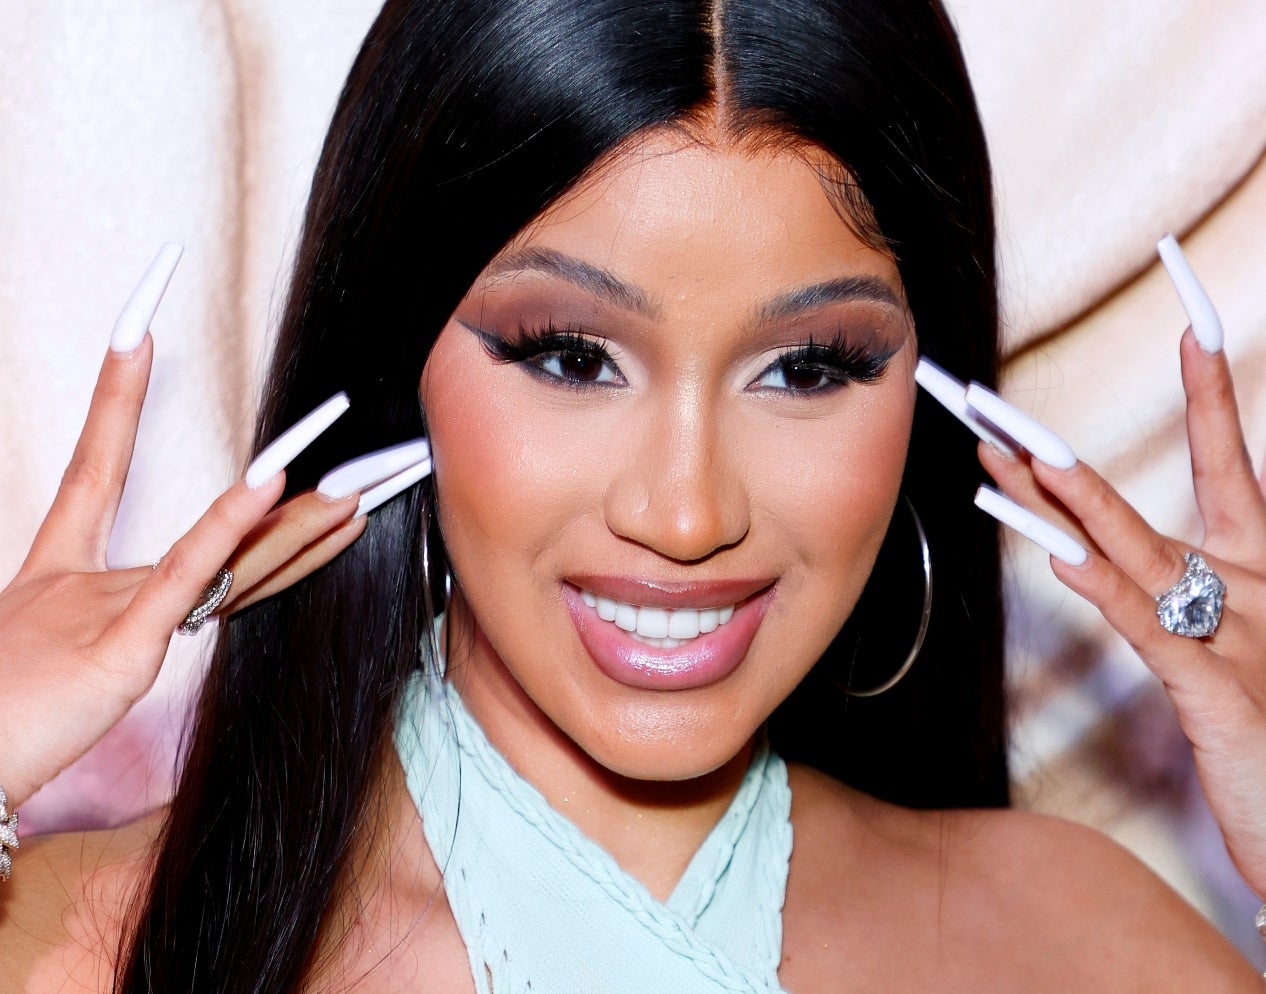 Cardi B Gave A Fascinating Tutorial On How To Change A Diaper With Long Nails